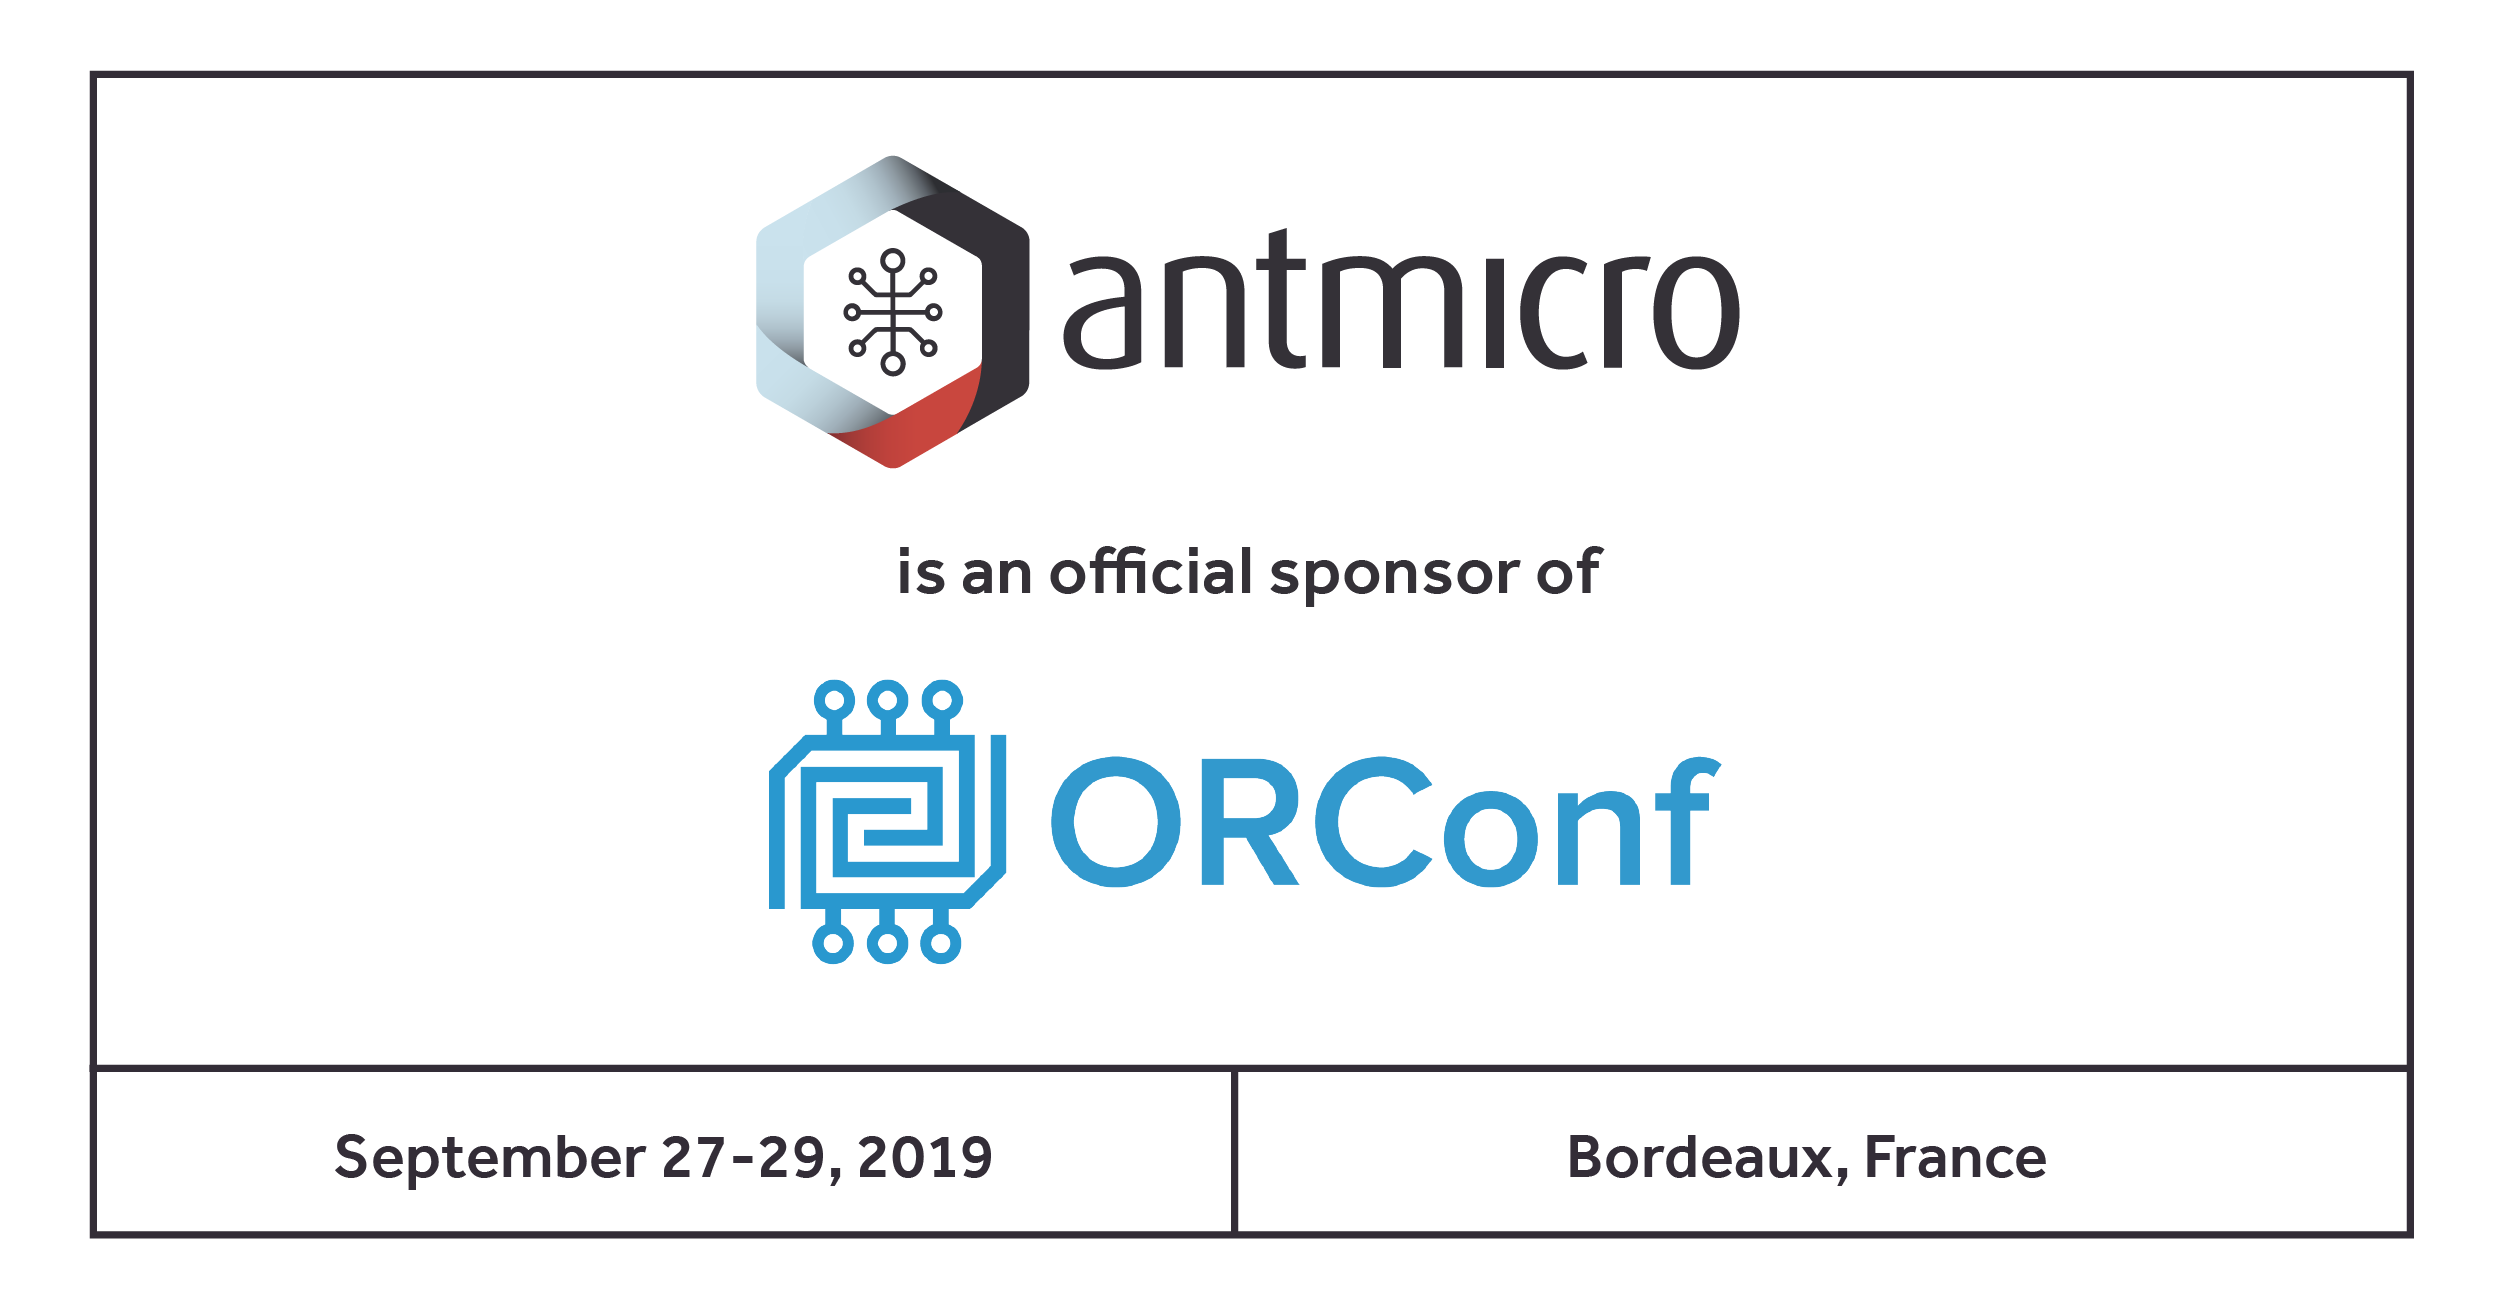 Antmicro sponsors ORConf 2019